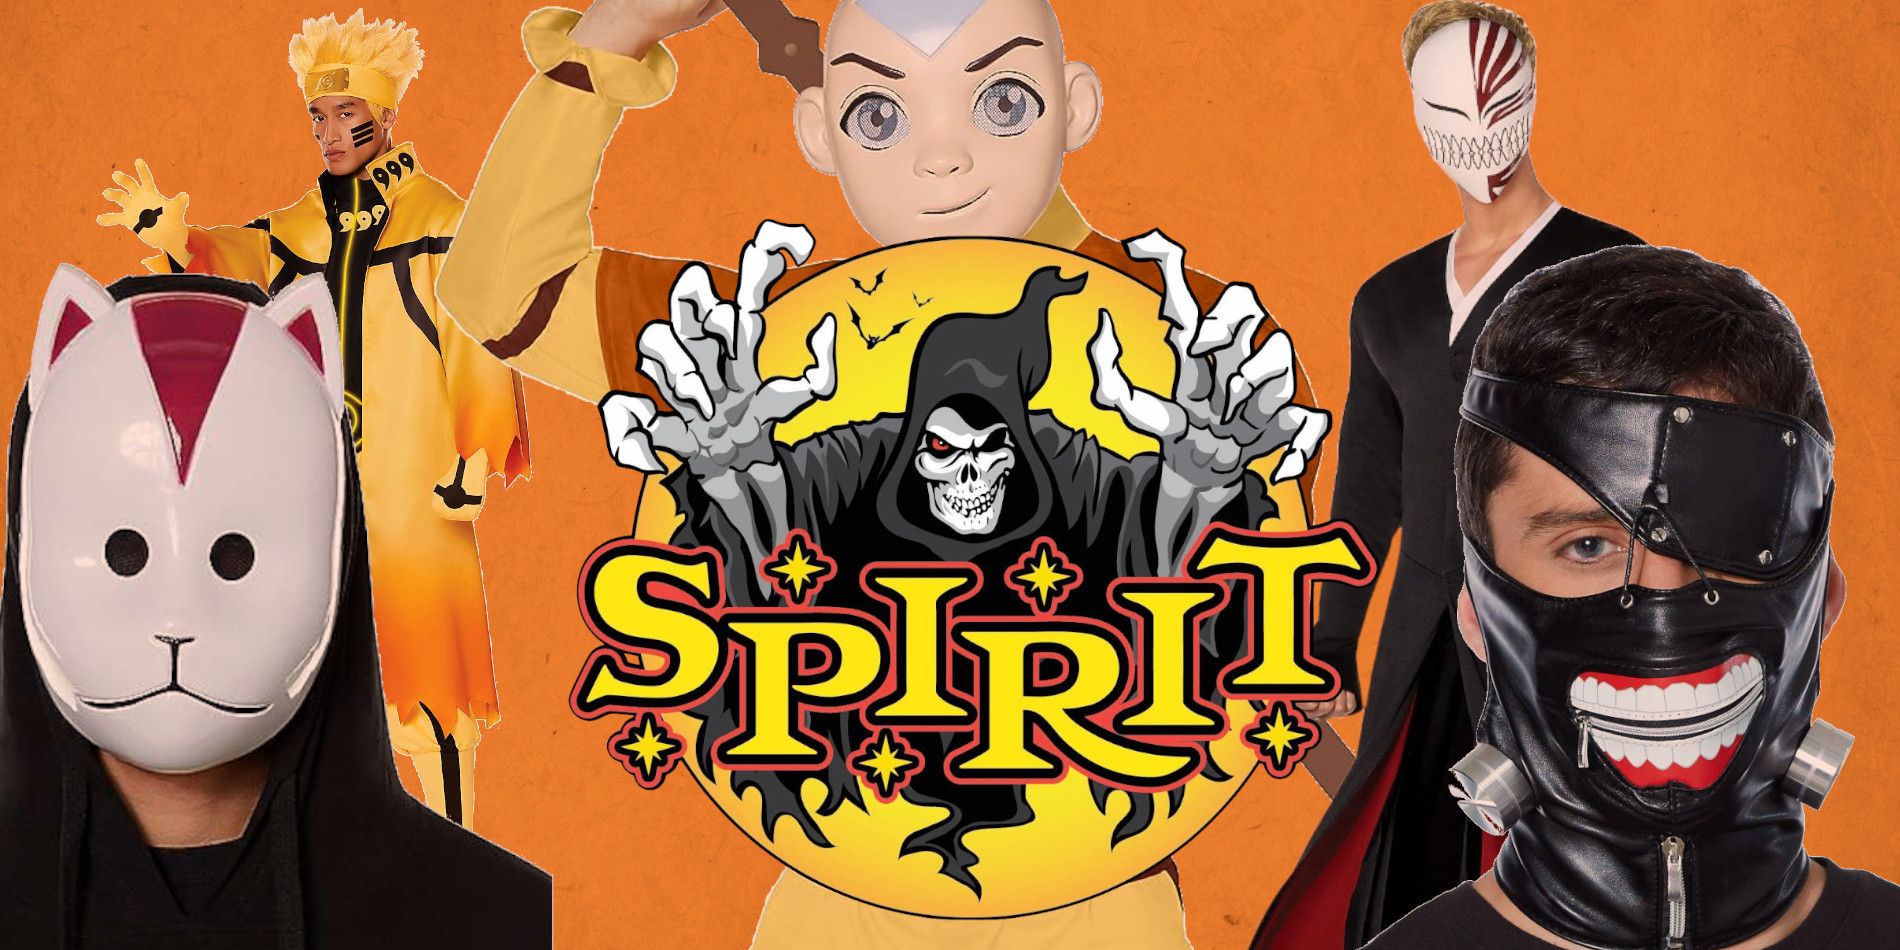 The Spirit Halloween logo surrounded by costumes based on Bleach, Naruto and Avatar